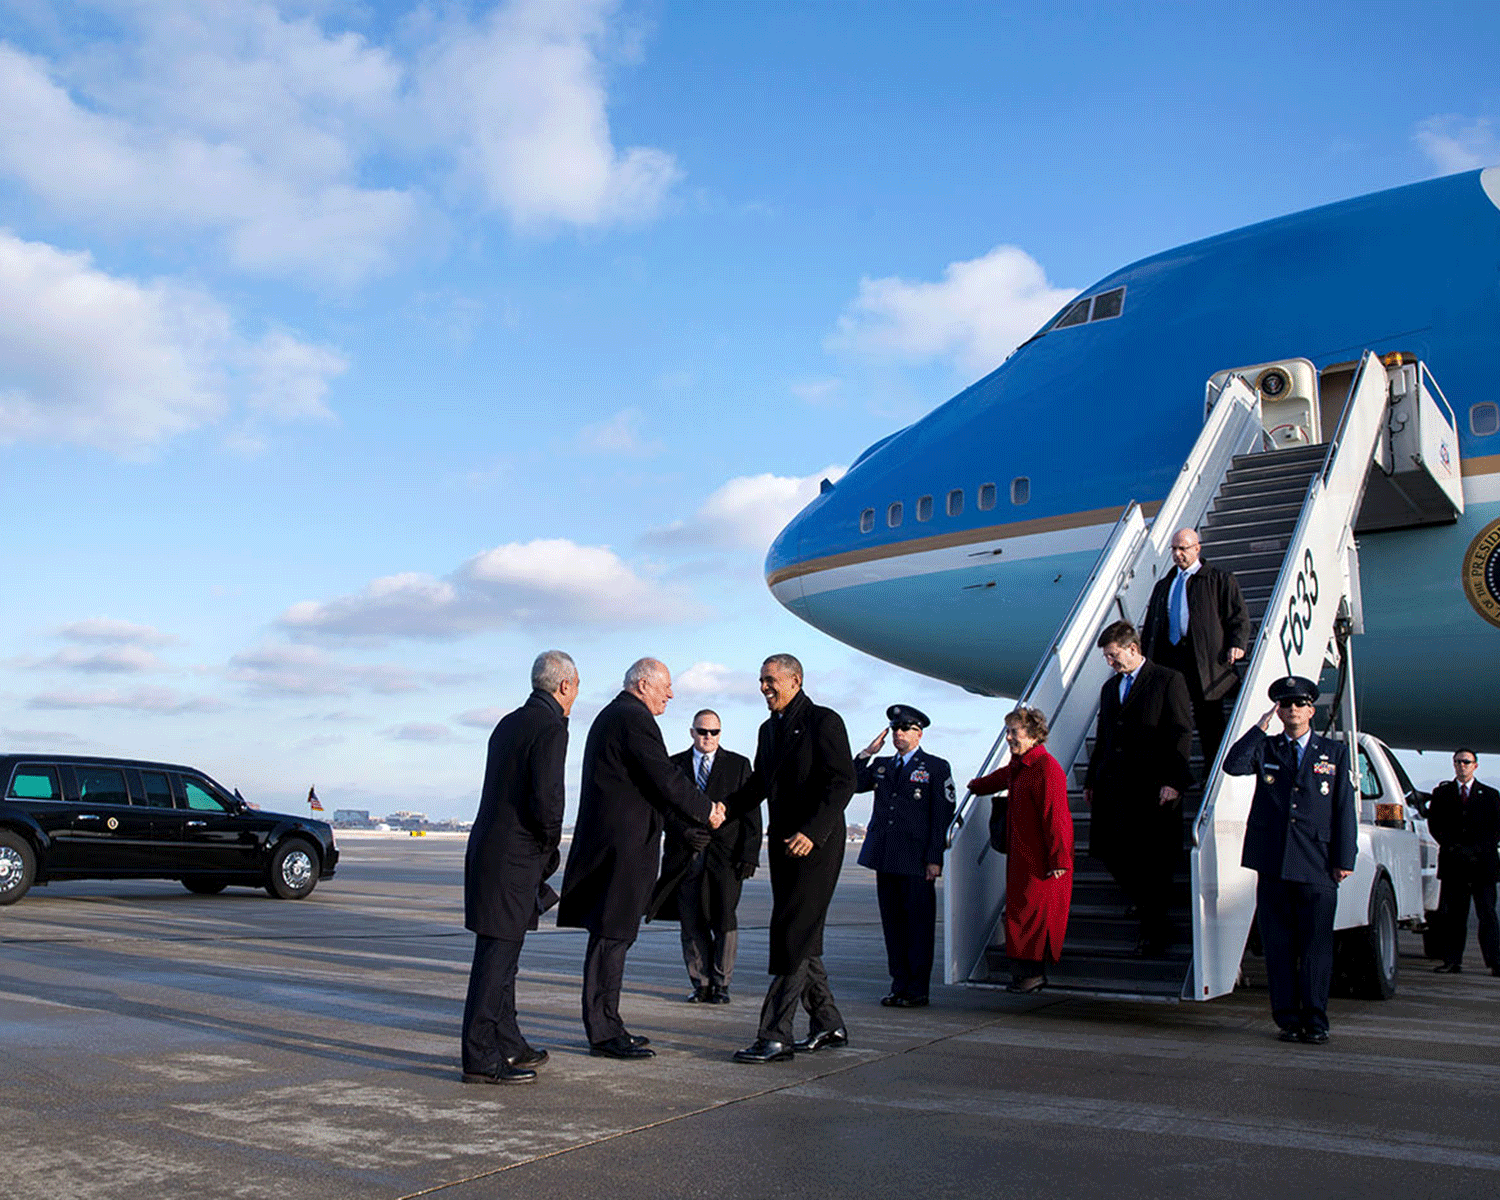 Barack Obama arriving at O'Hare International Airport in Chicago